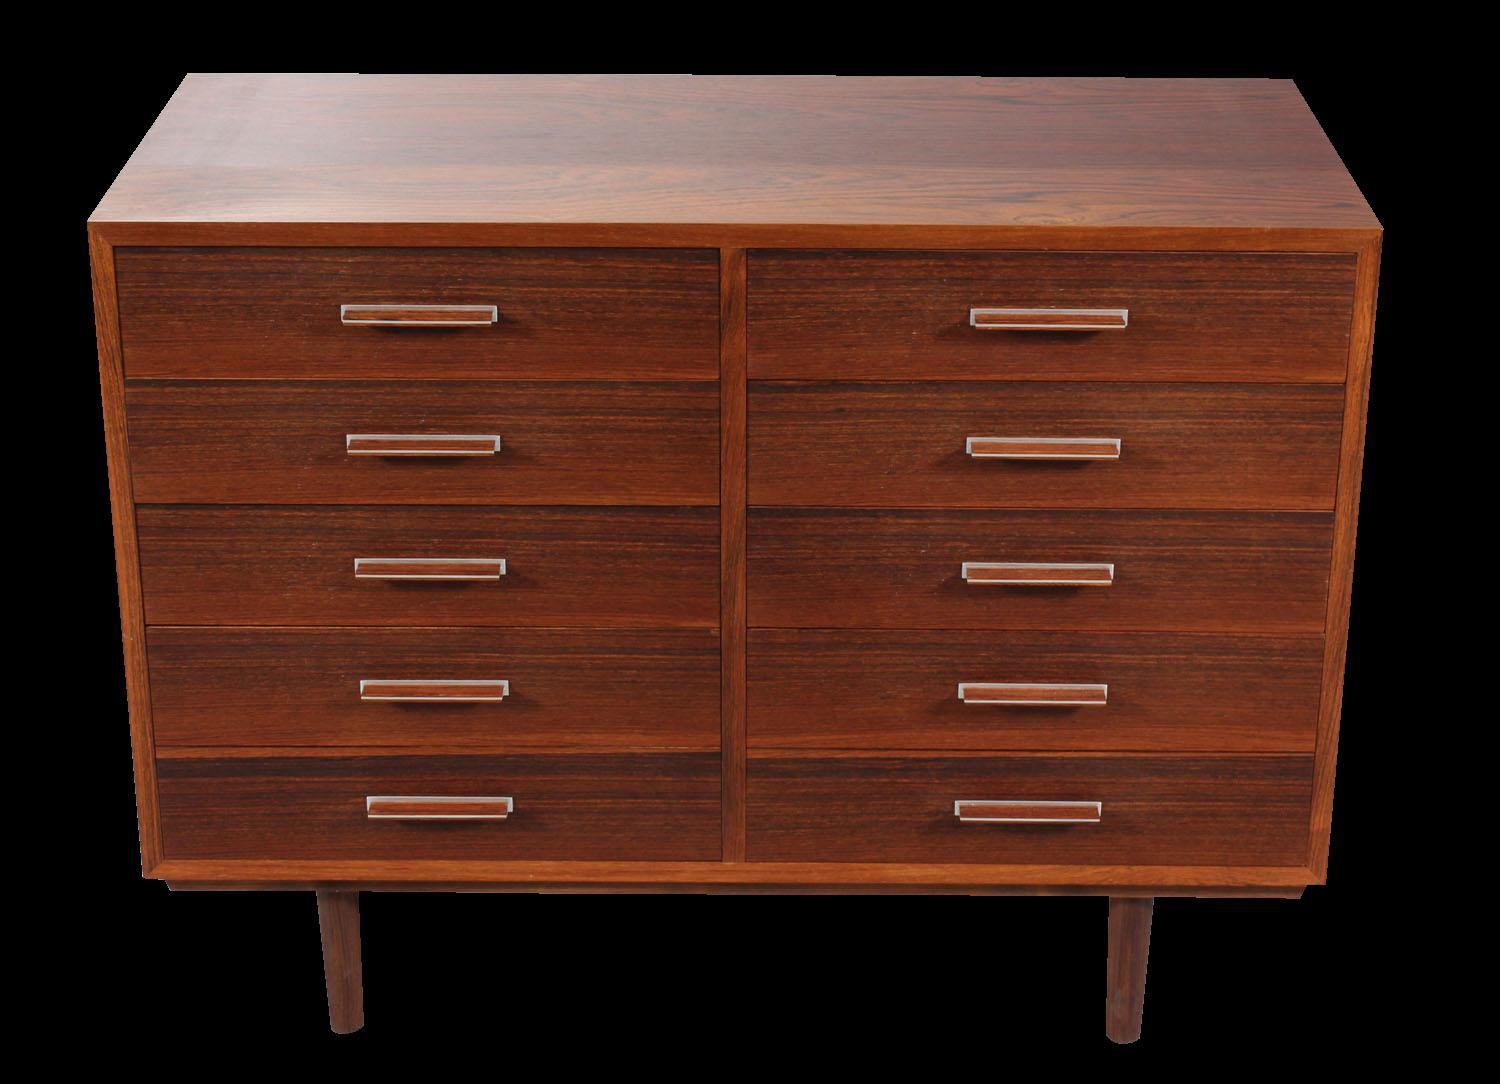 20th Century Rosewood Chest of 8 Drawers by Axel Christiansen for ACD Mobler